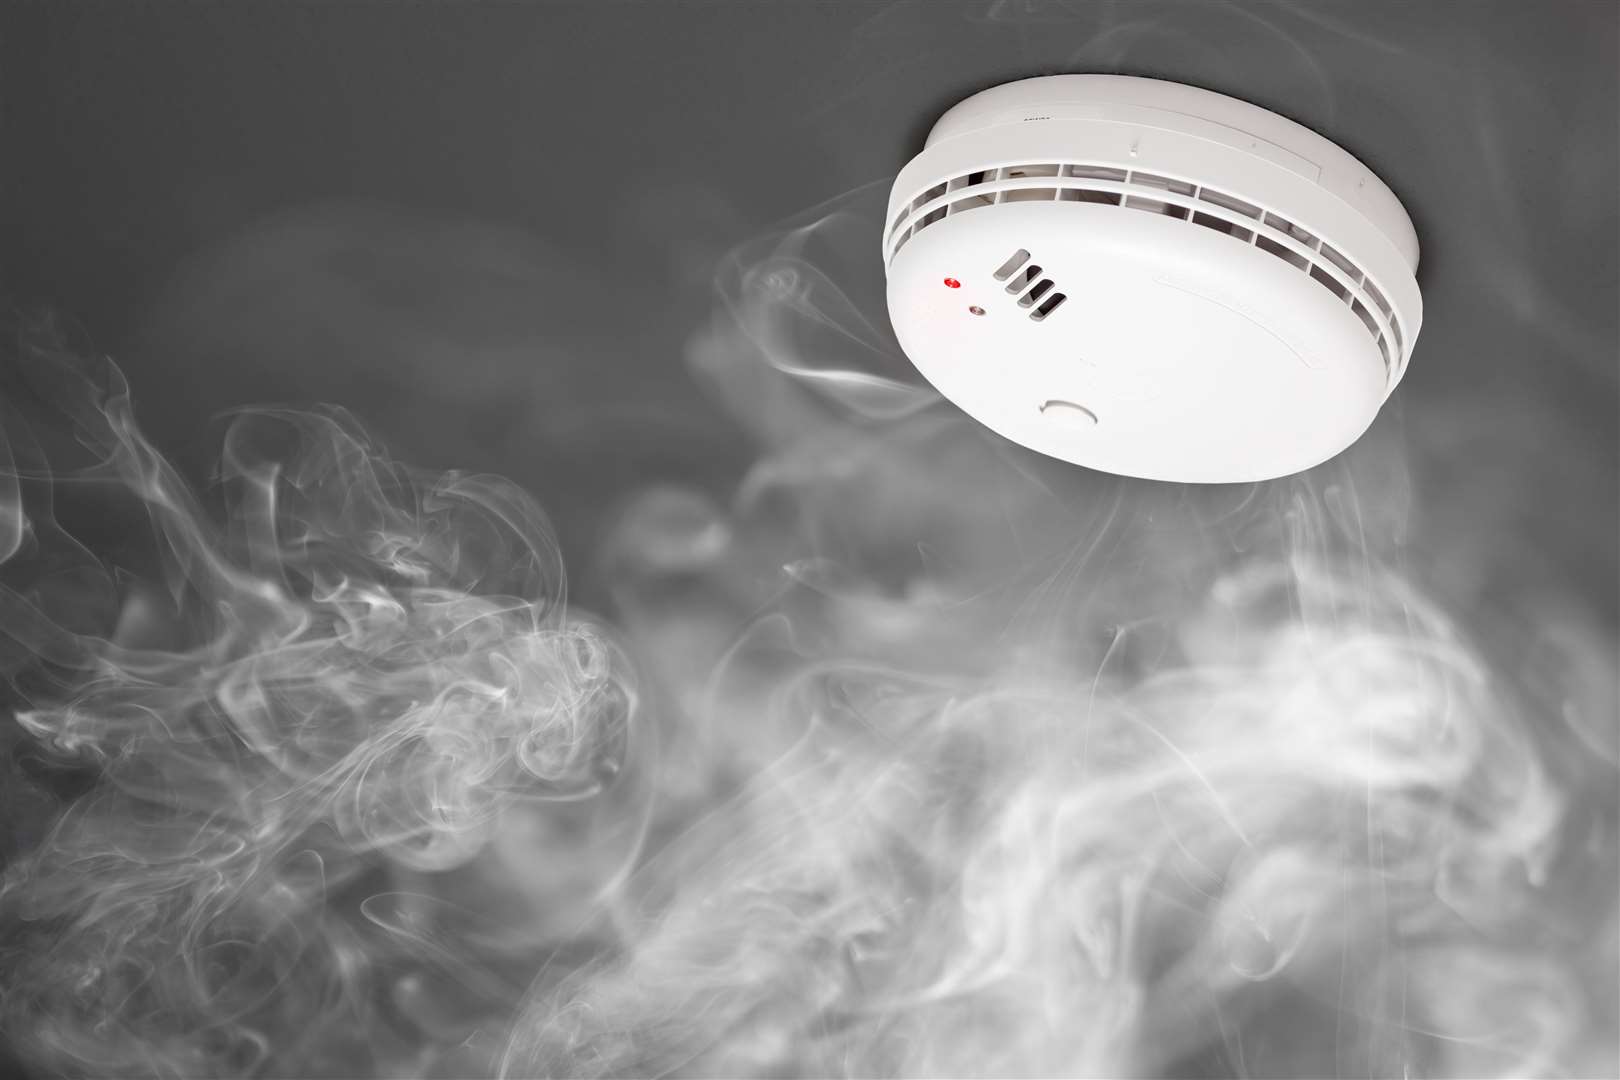 You should test your smoke alarm once a week